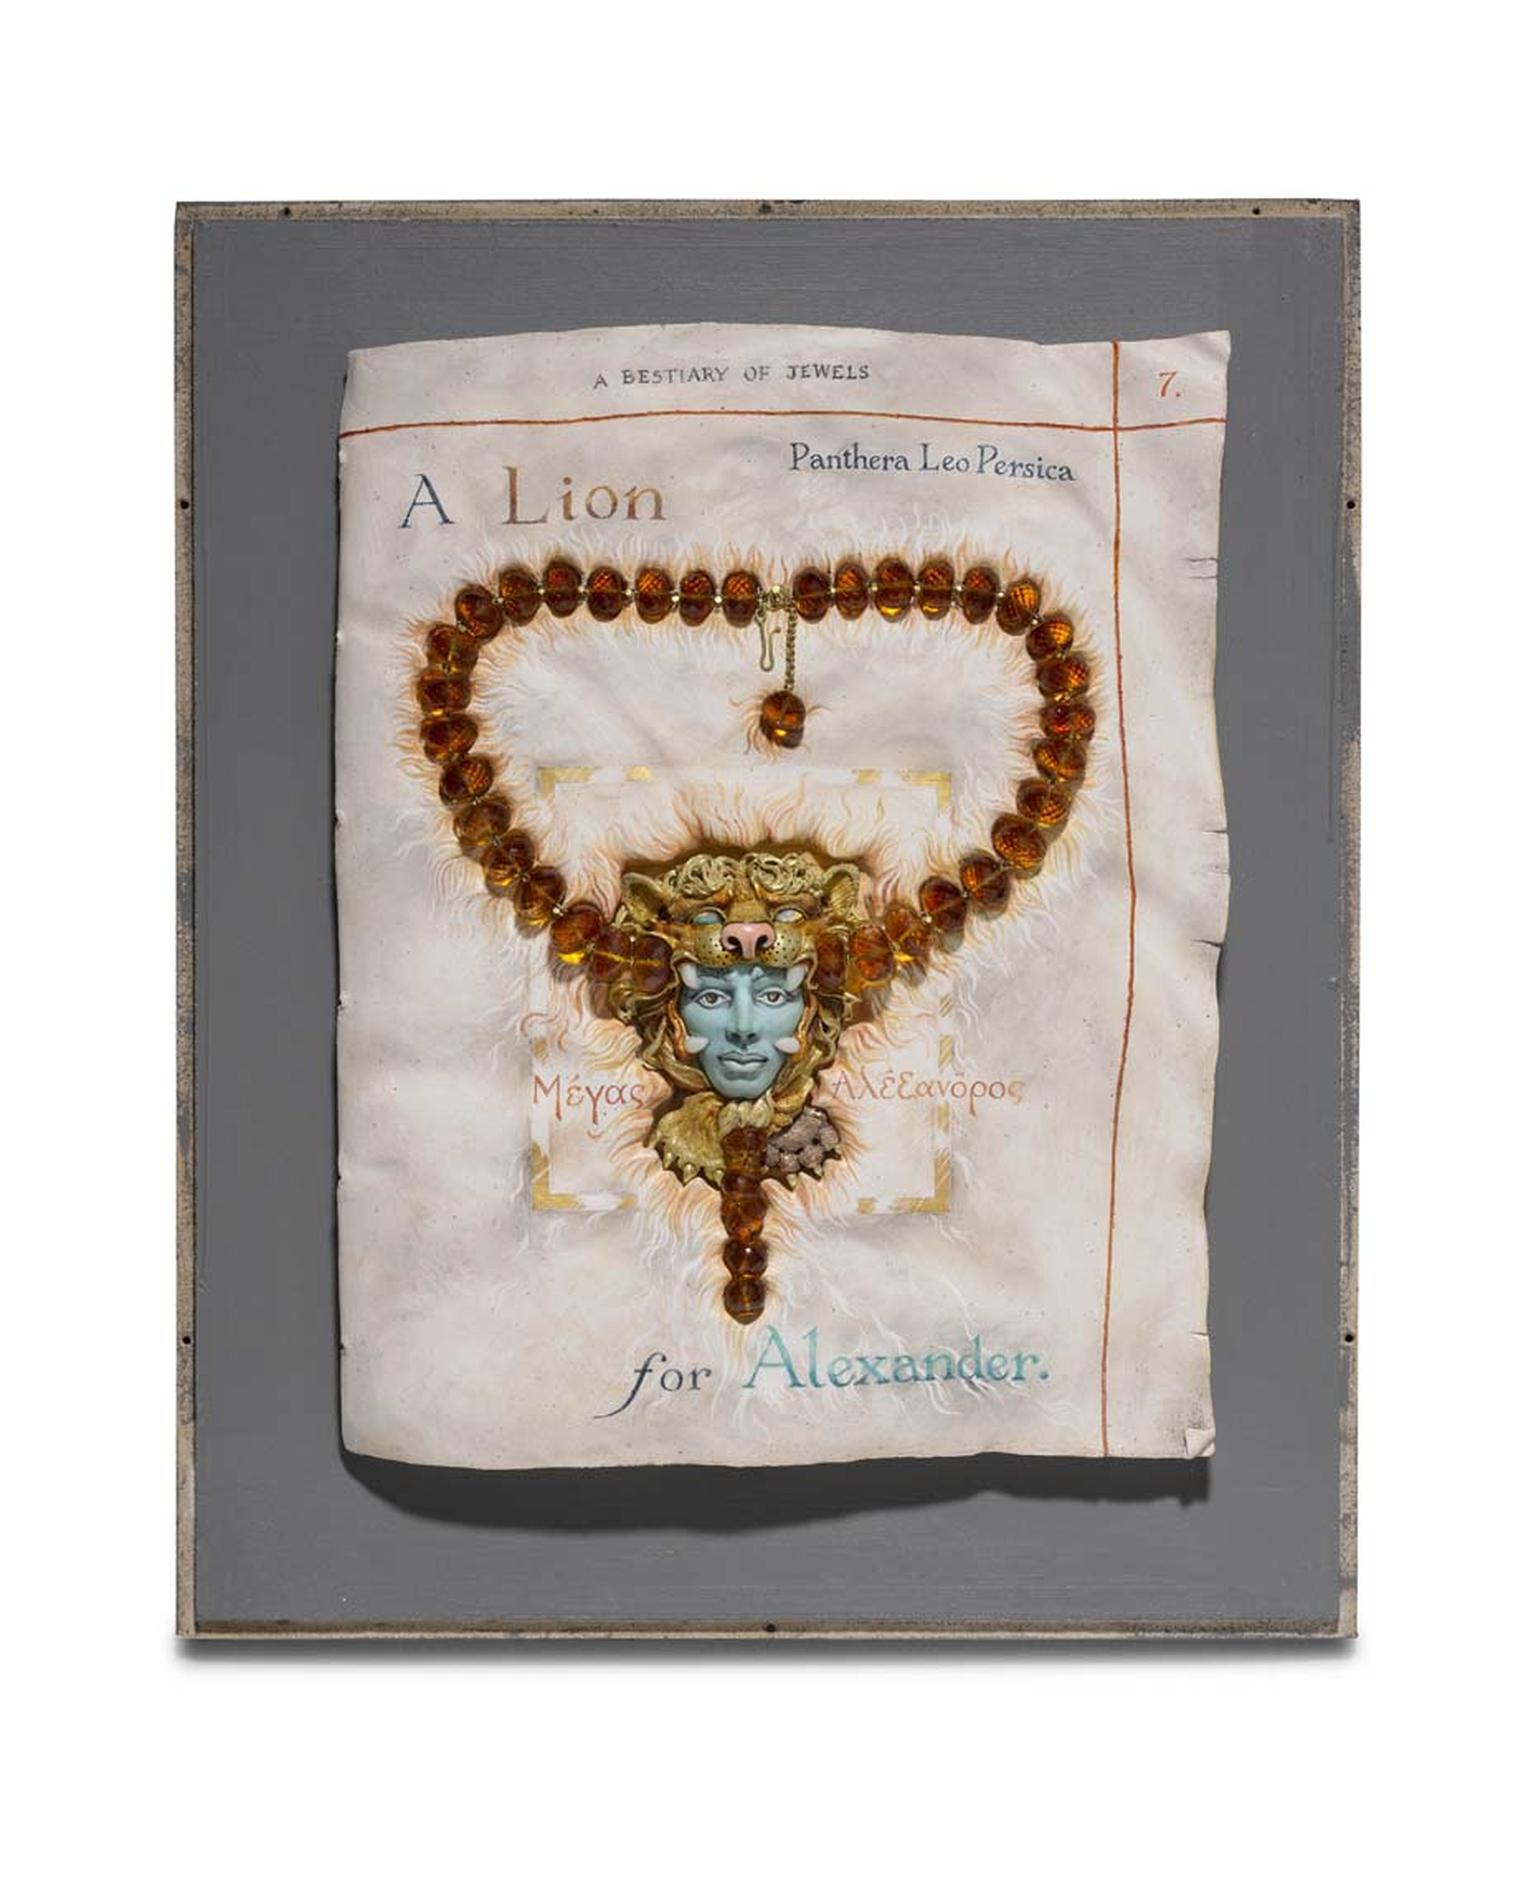 Artist-jeweller Kevin Coates exhibits his Bestiary of Jewels at the Ashmolean